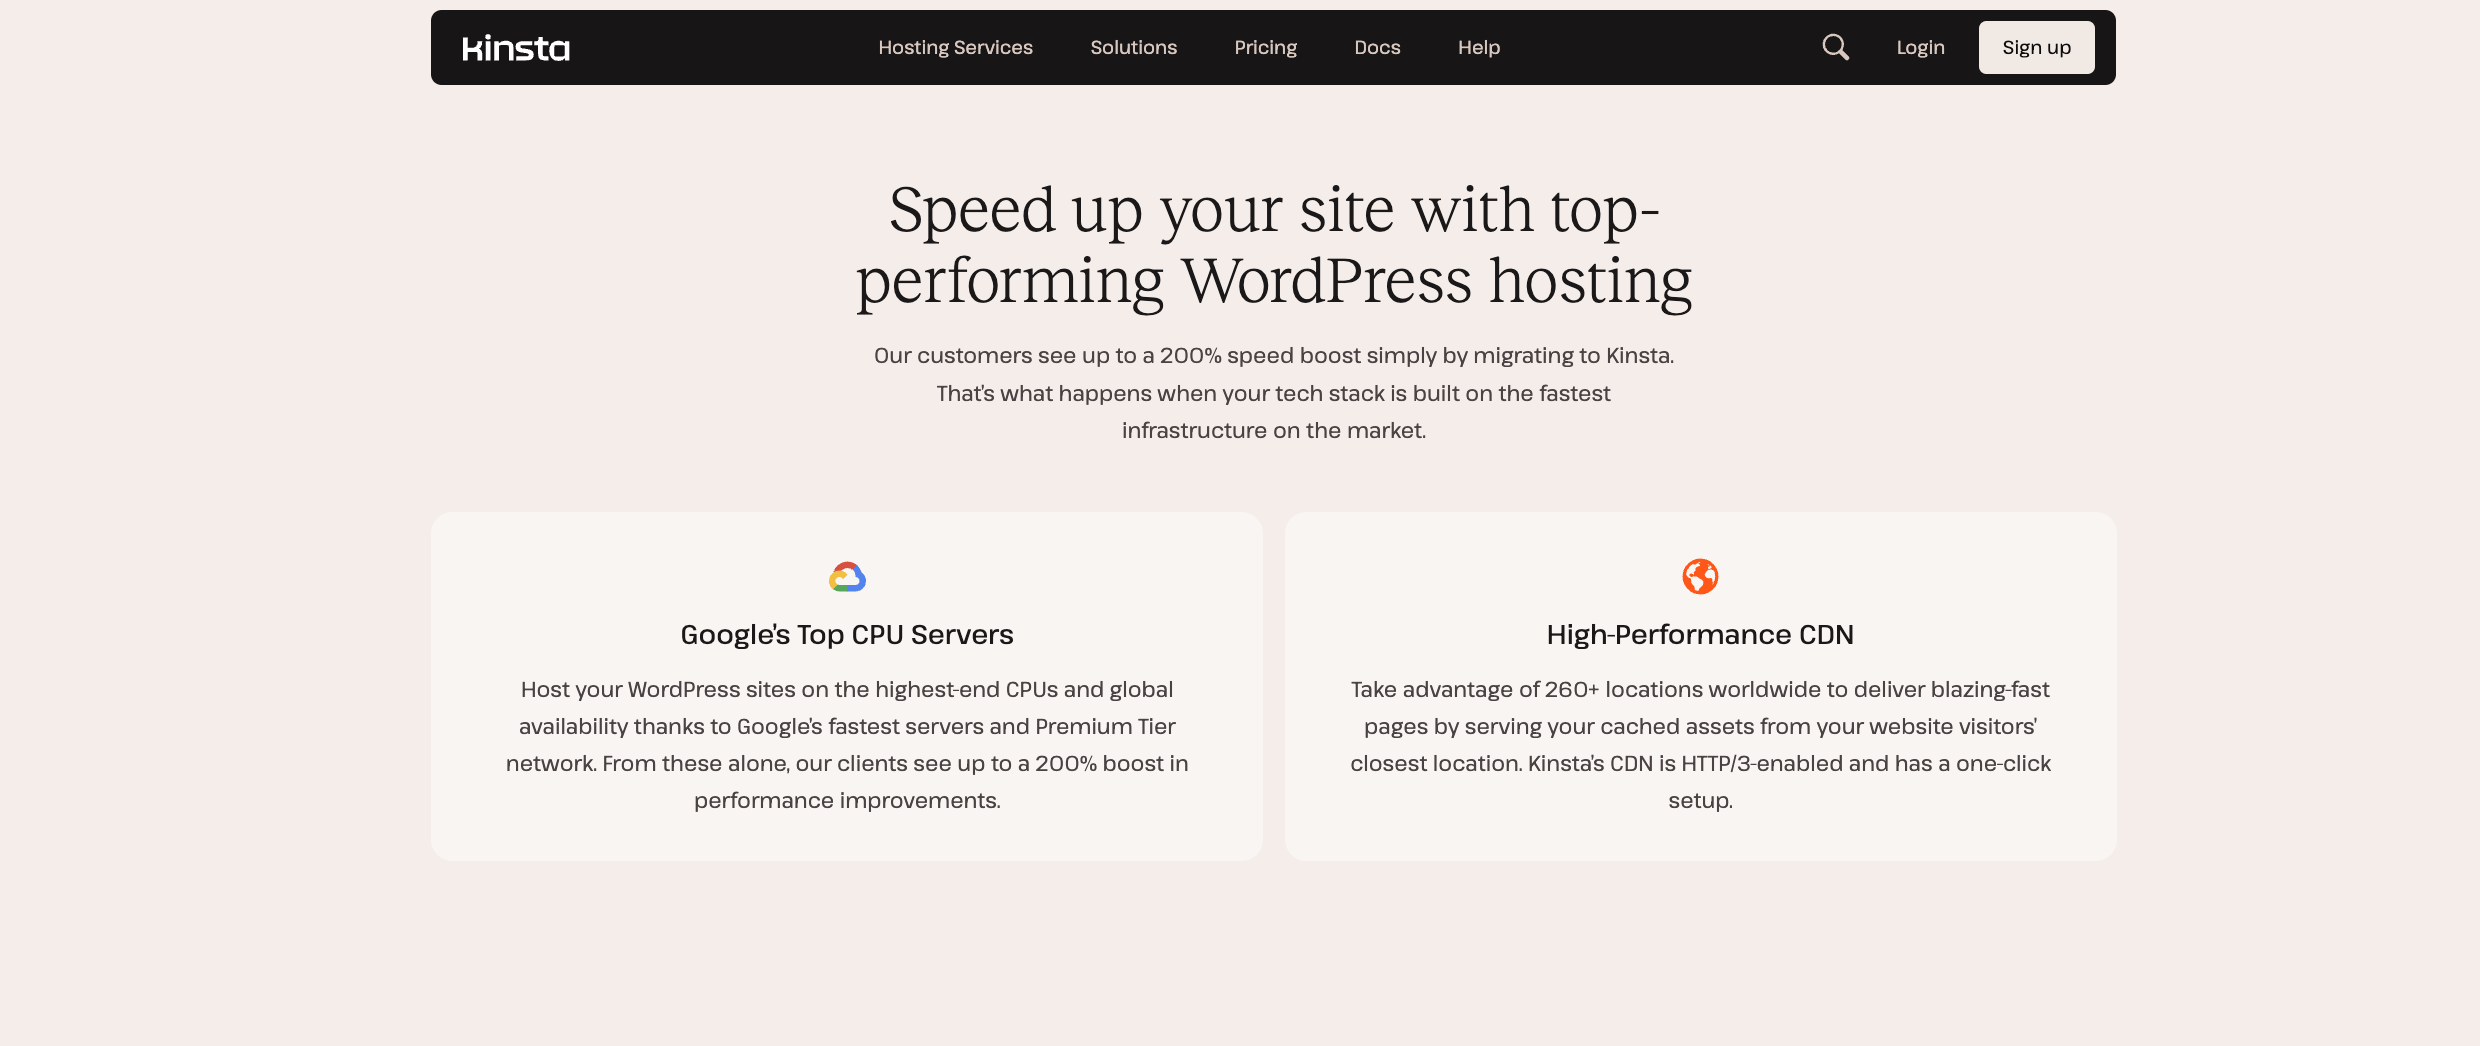 Screenshot of Kinsta's homepage highlighting their WordPress hosting features and speed boost offer